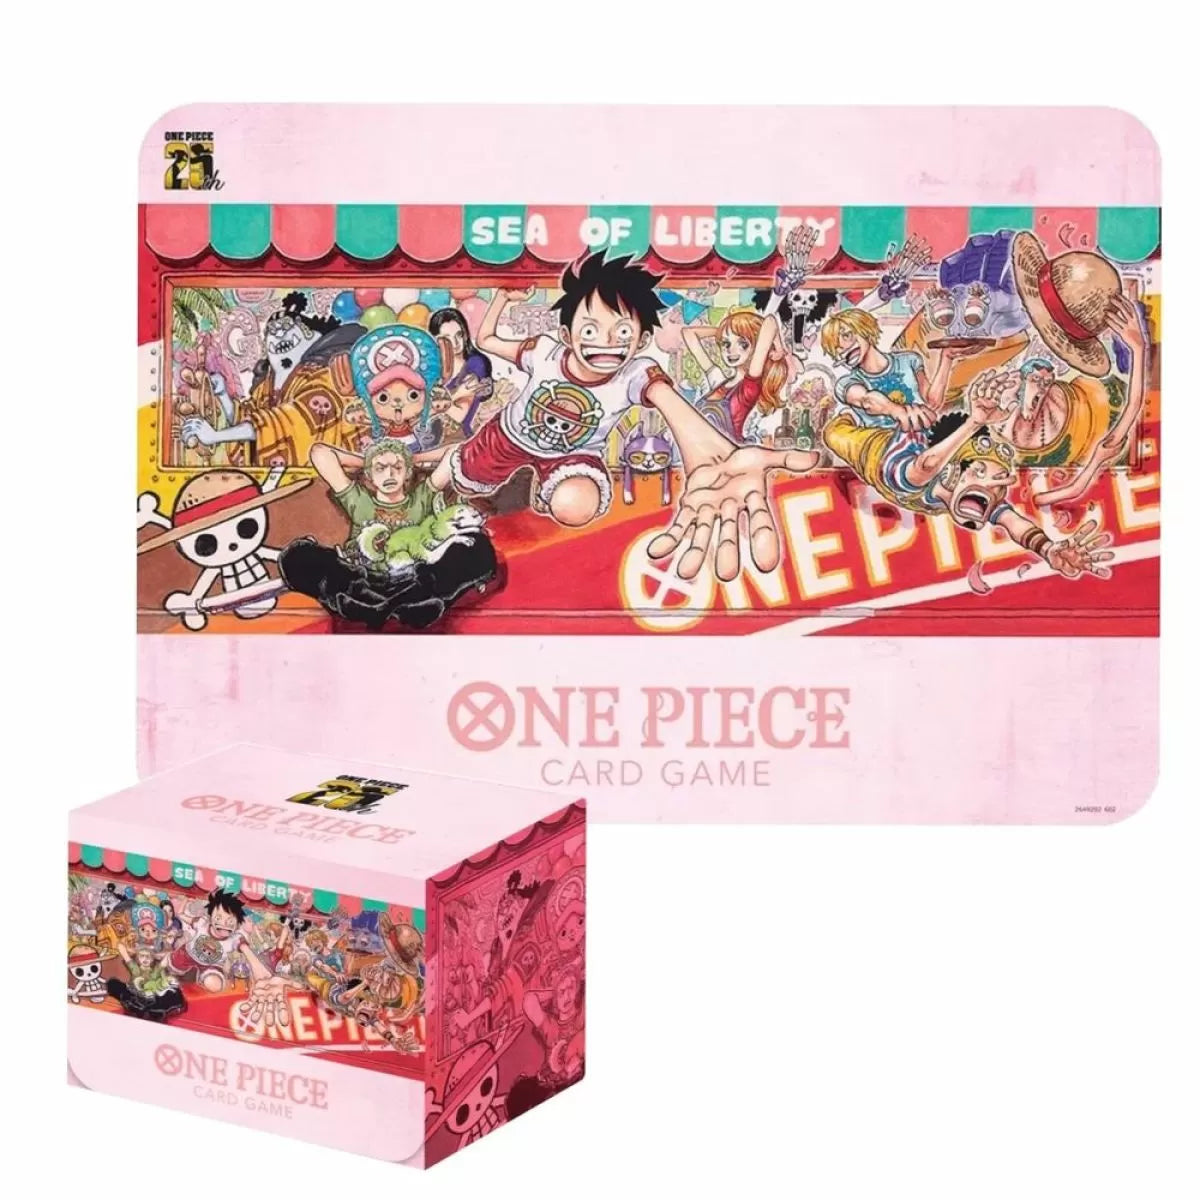 ONE PIECE CARD GAME PLAYMAT AND STORAGE BOX SET